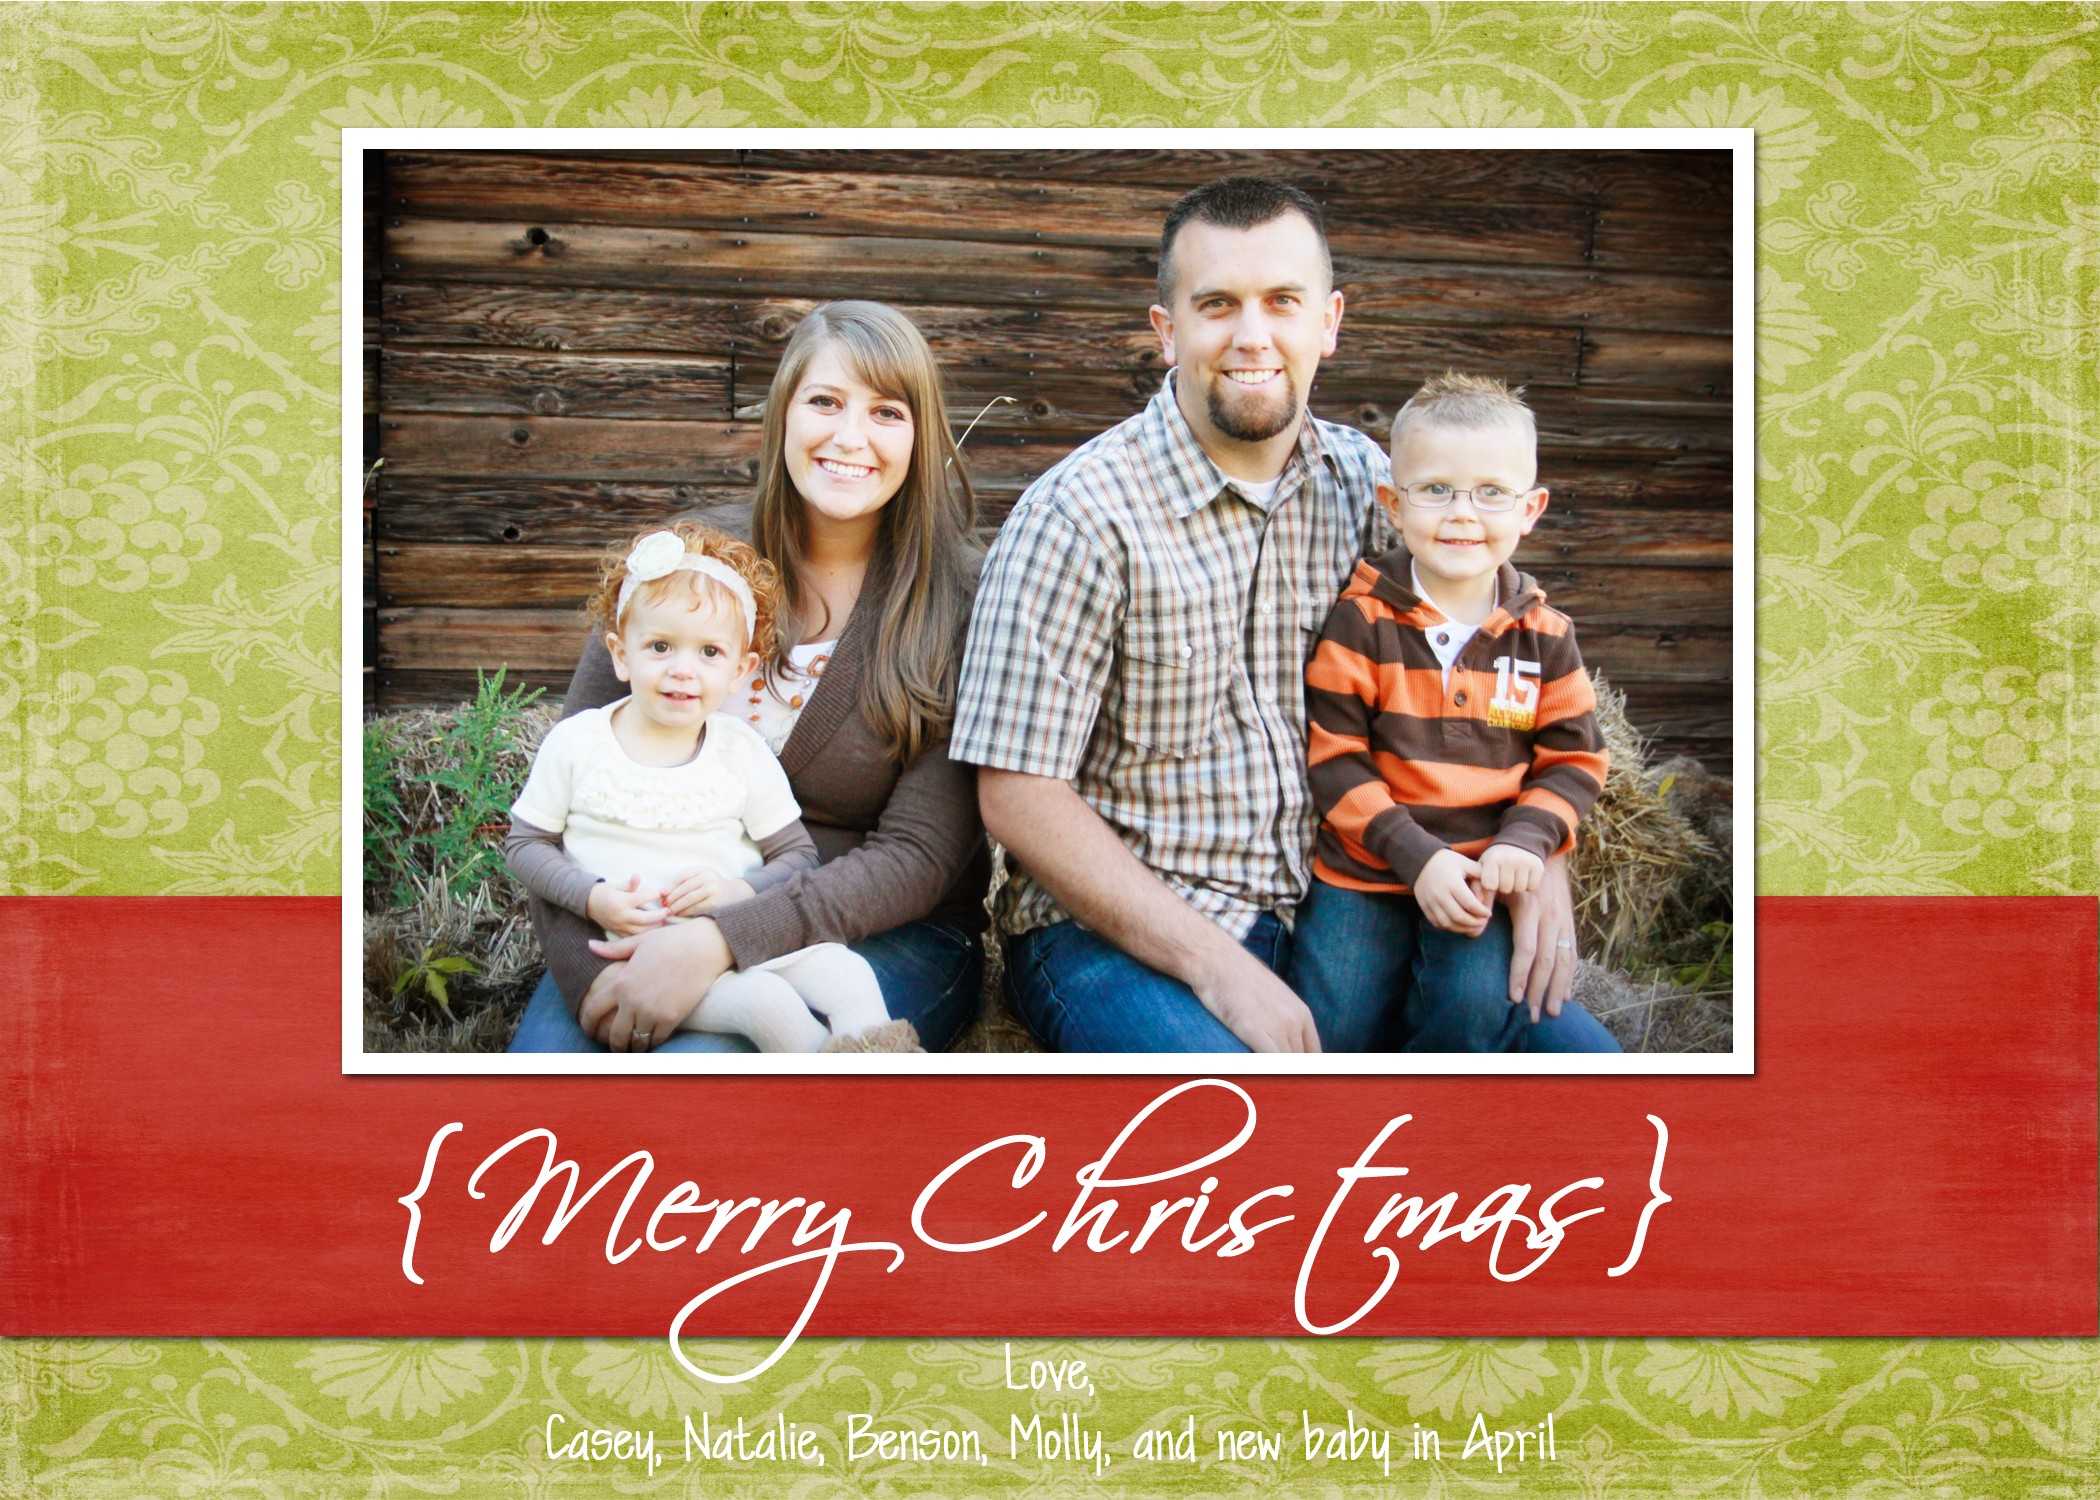 Christmas Holiday Card Templates For Photographers Photoshop Within Christmas Photo Card Templates Photoshop